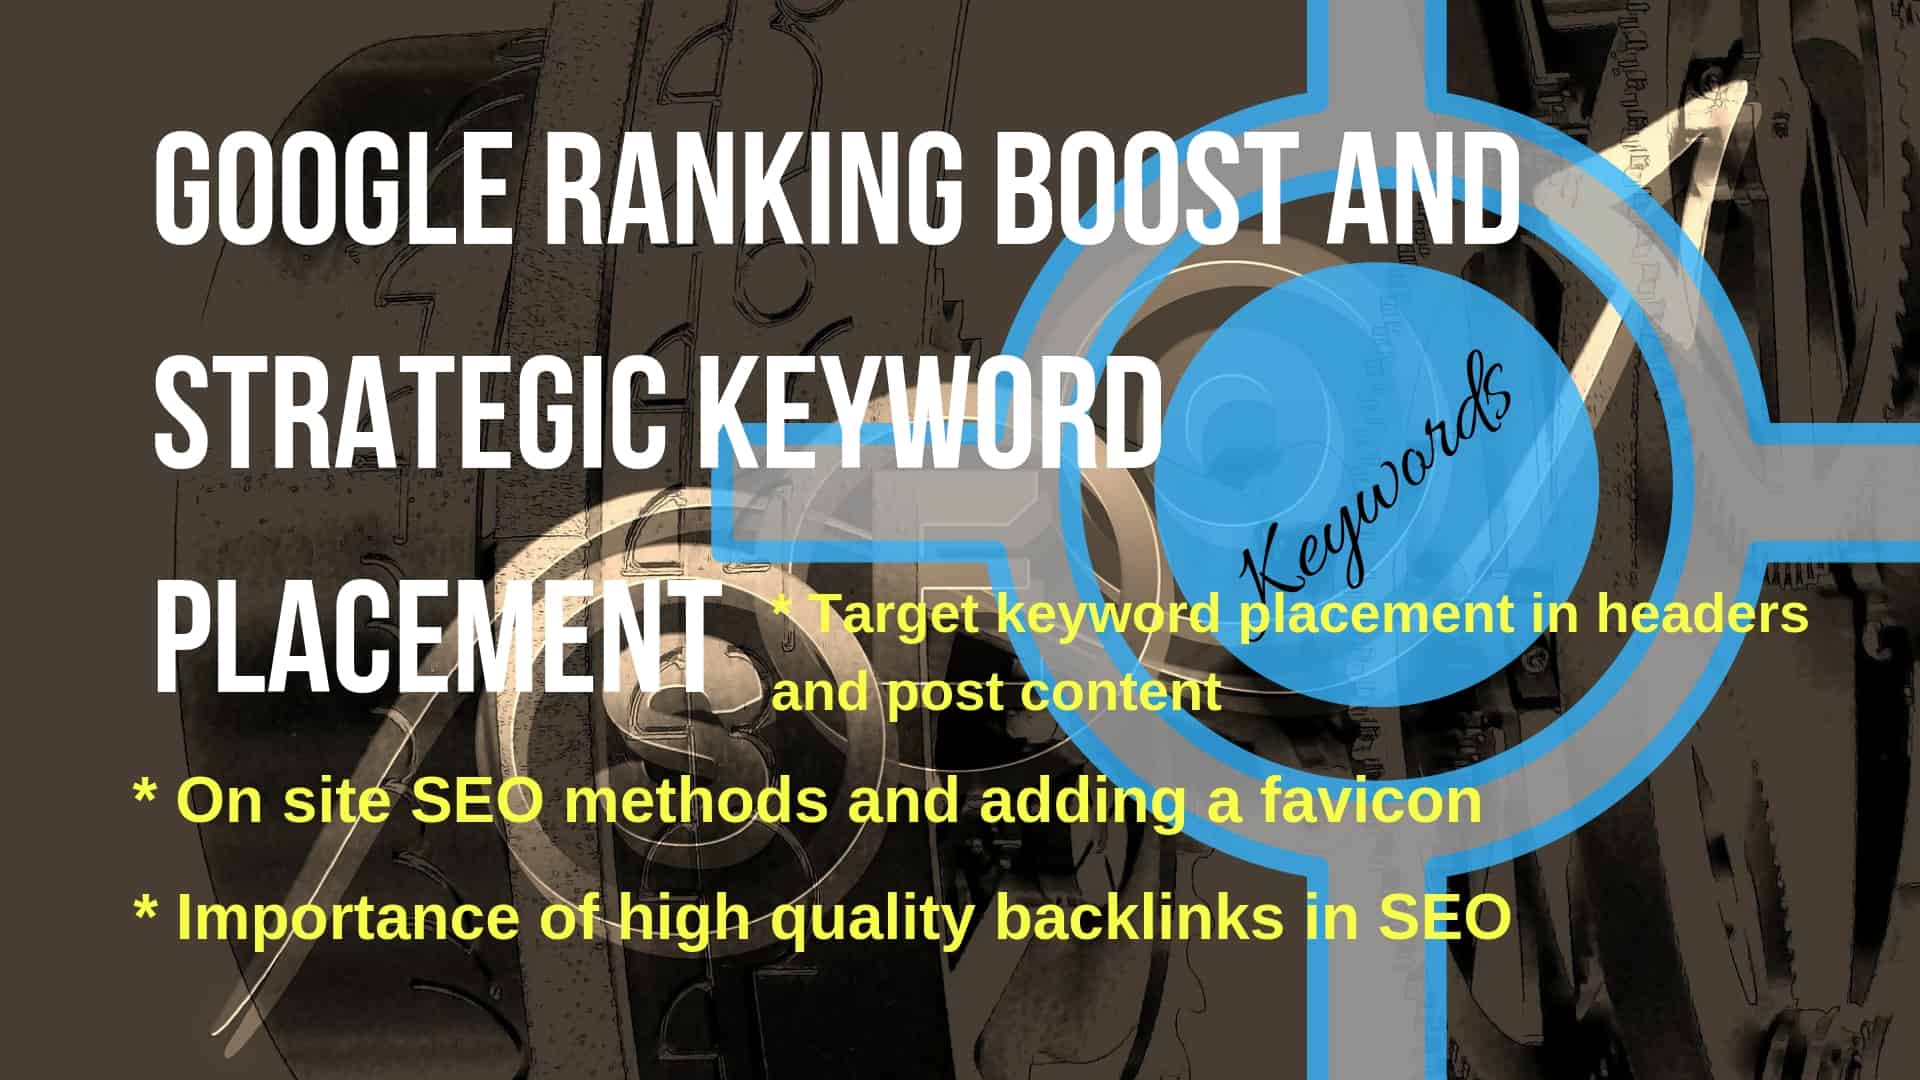 Google ranking boost capability and strategic keyword placement